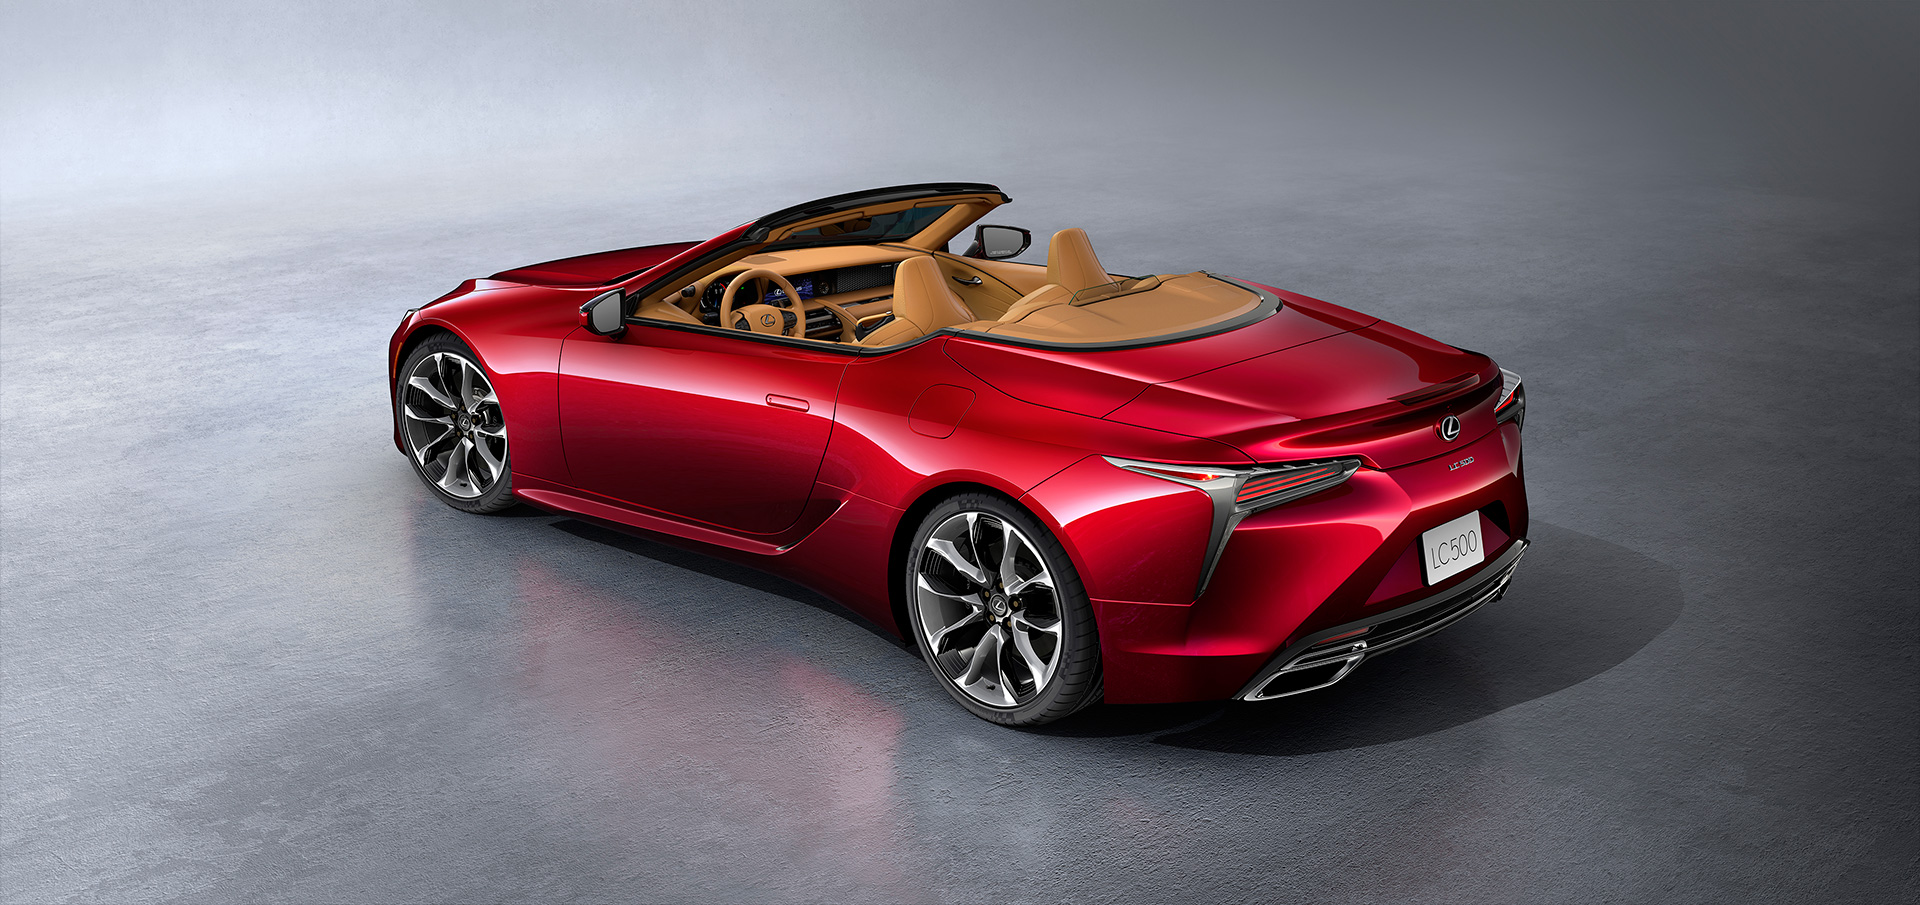 The Stunning Lexus Lc 500 Convertible Makes Its Global Debut At